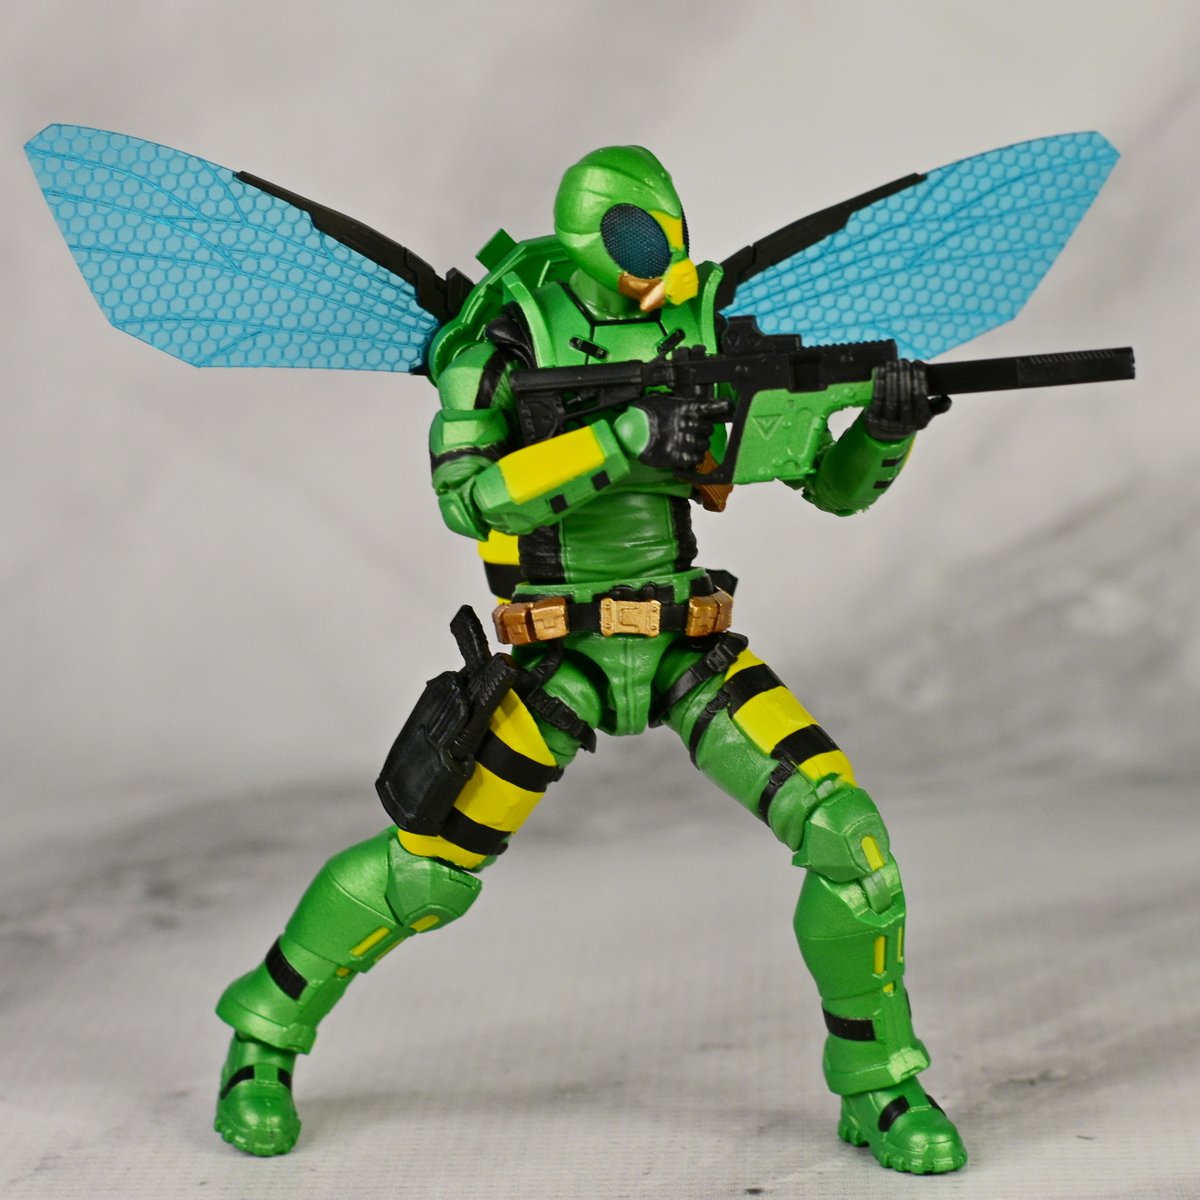 Figure of the Day #6:

SWARM Wasp Raider

Action Force by Valaverse

#figureoftheday